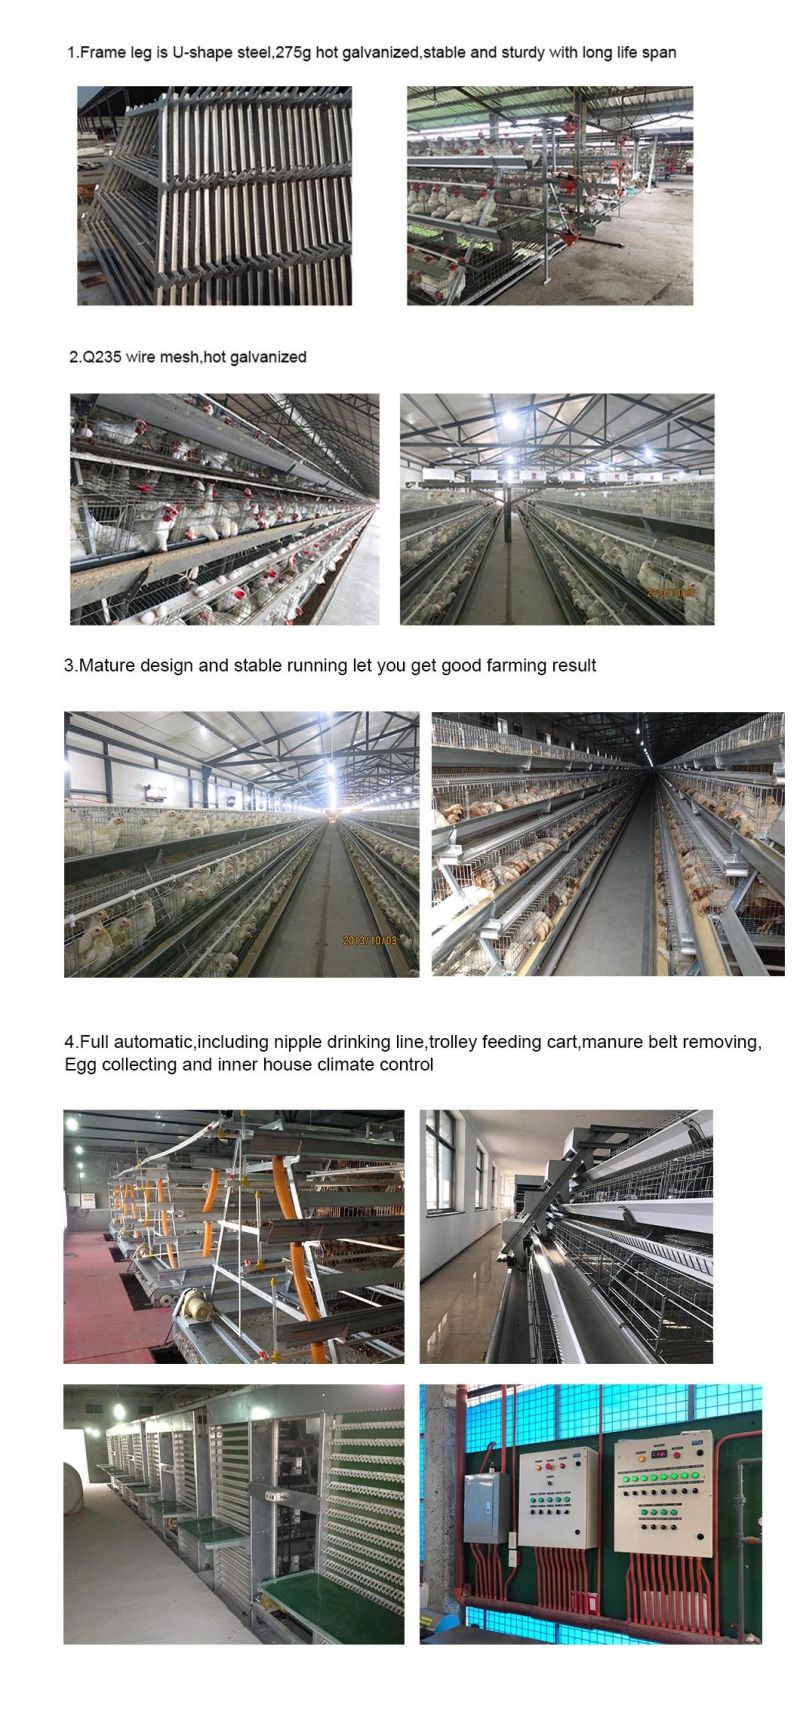 Longfeng Large Scale Poultry Farming High Density Factory Price Hot Galvanized Layer Cage